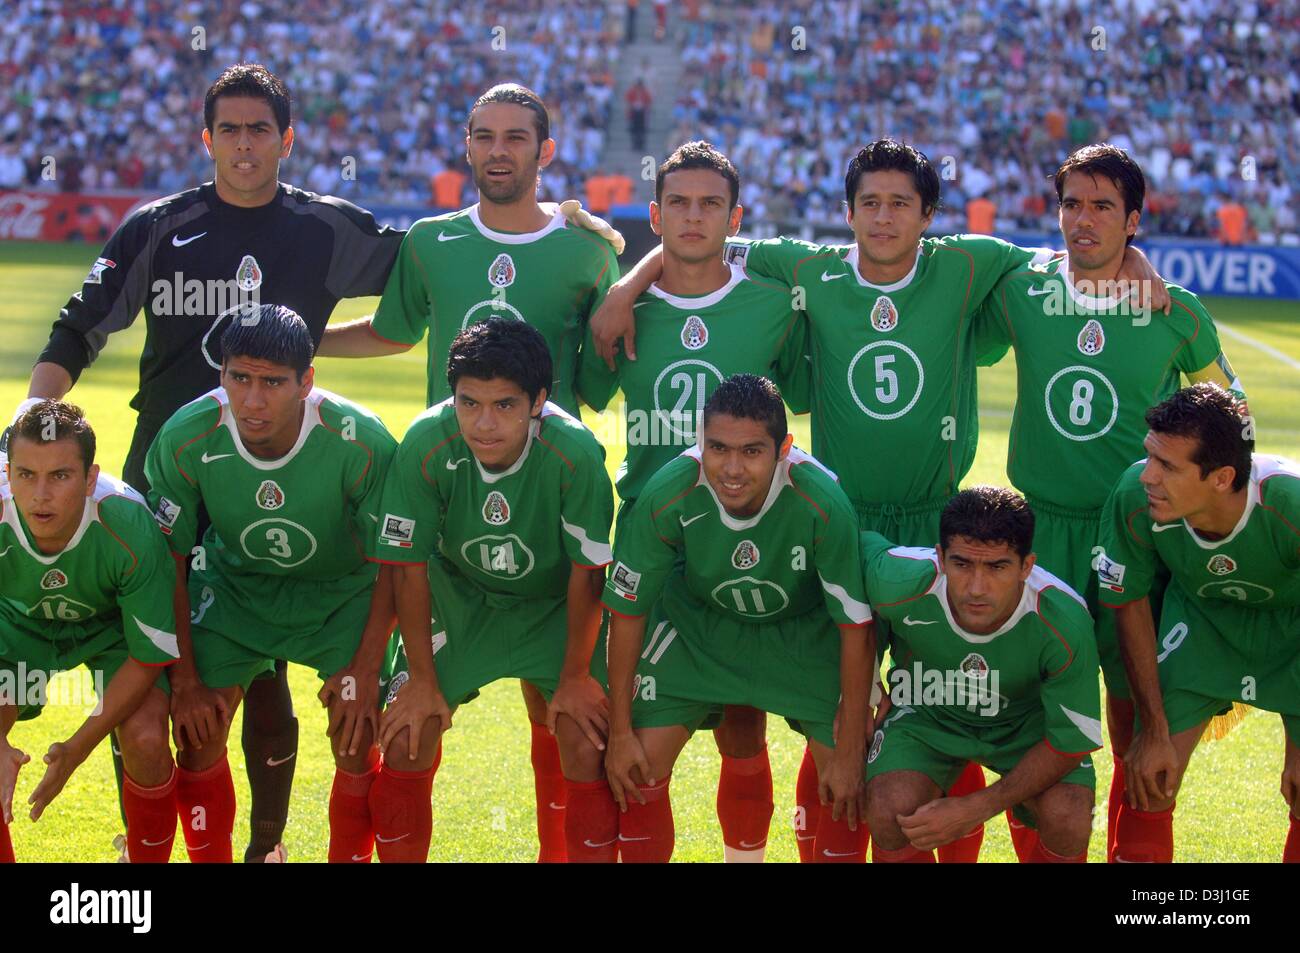 (dpa) - The picture shows the Mexican National soccer team prior to their semi-final match against Argentina at the FIFA Confederations Cup 2005 tournament in Hanover, Germany,  26 June 2005. In the front row stand Mario Mendez, Carlos Salcido, Gonzalo Pineda, Ramon Morales, Zinha, Jared Borgetti (L-R) and in the back Oswaldo Sanchez, Rafael Marquez, Jaime Lozano, Ricardo Osorio an Stock Photo